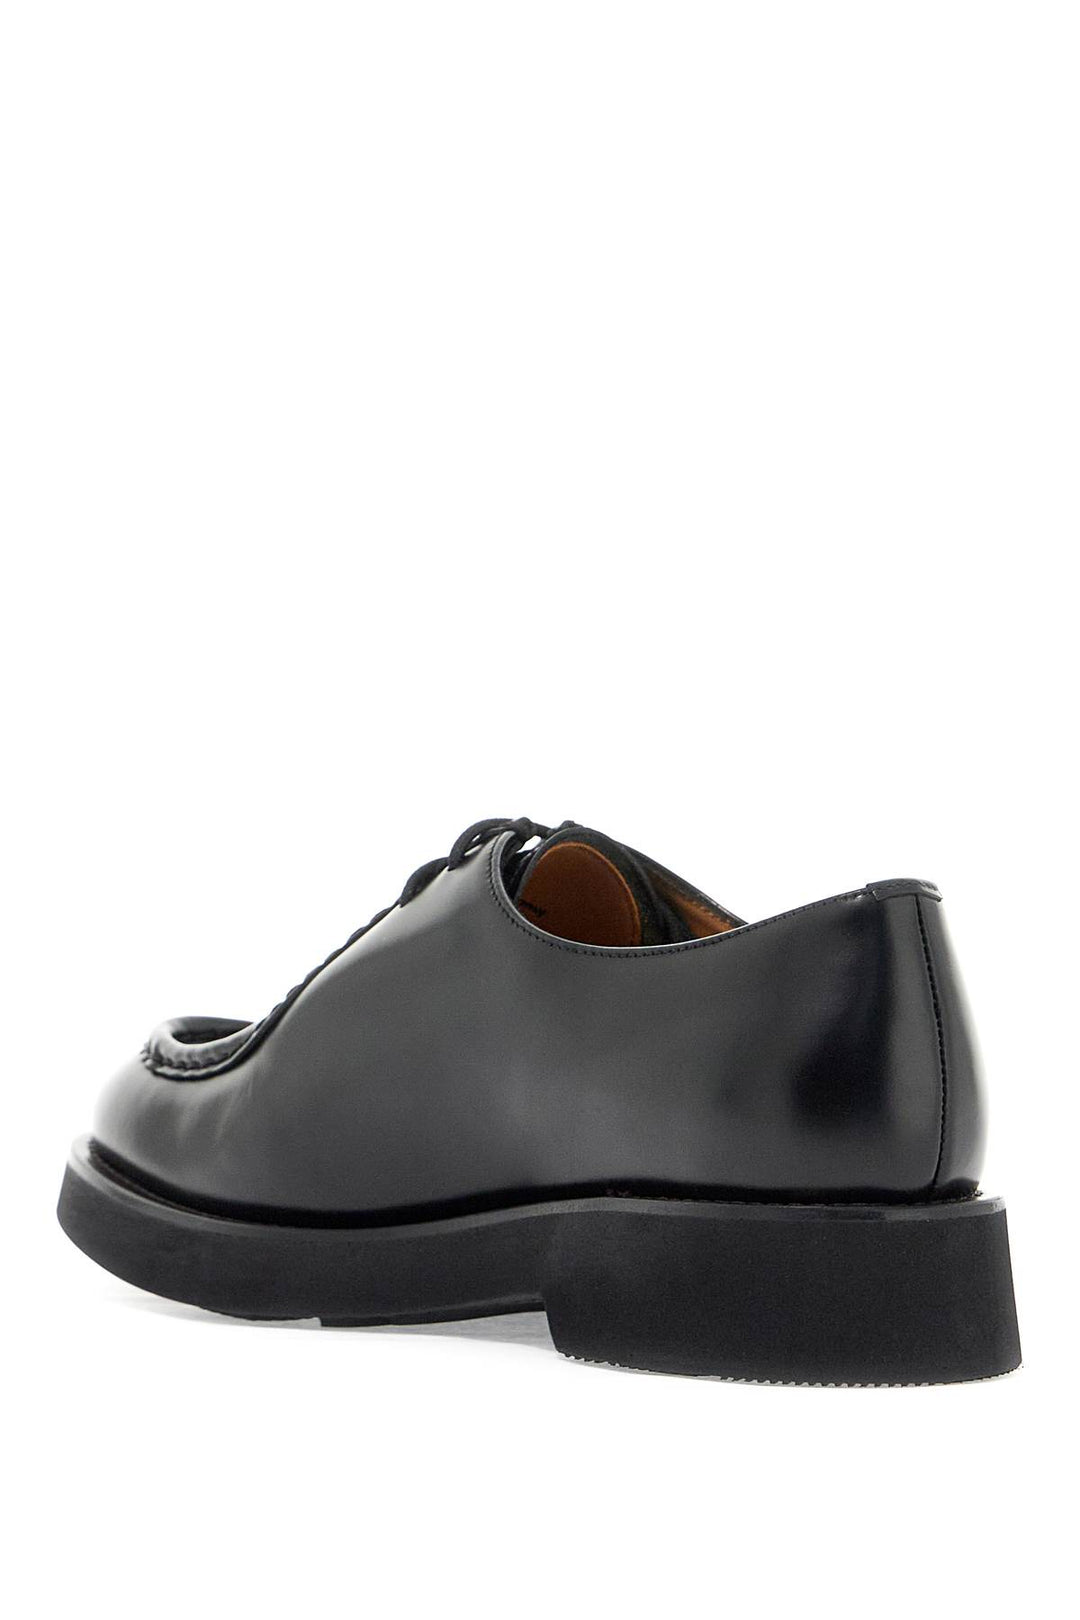 Church's Nelly Brushed Leather Lace Up   Black